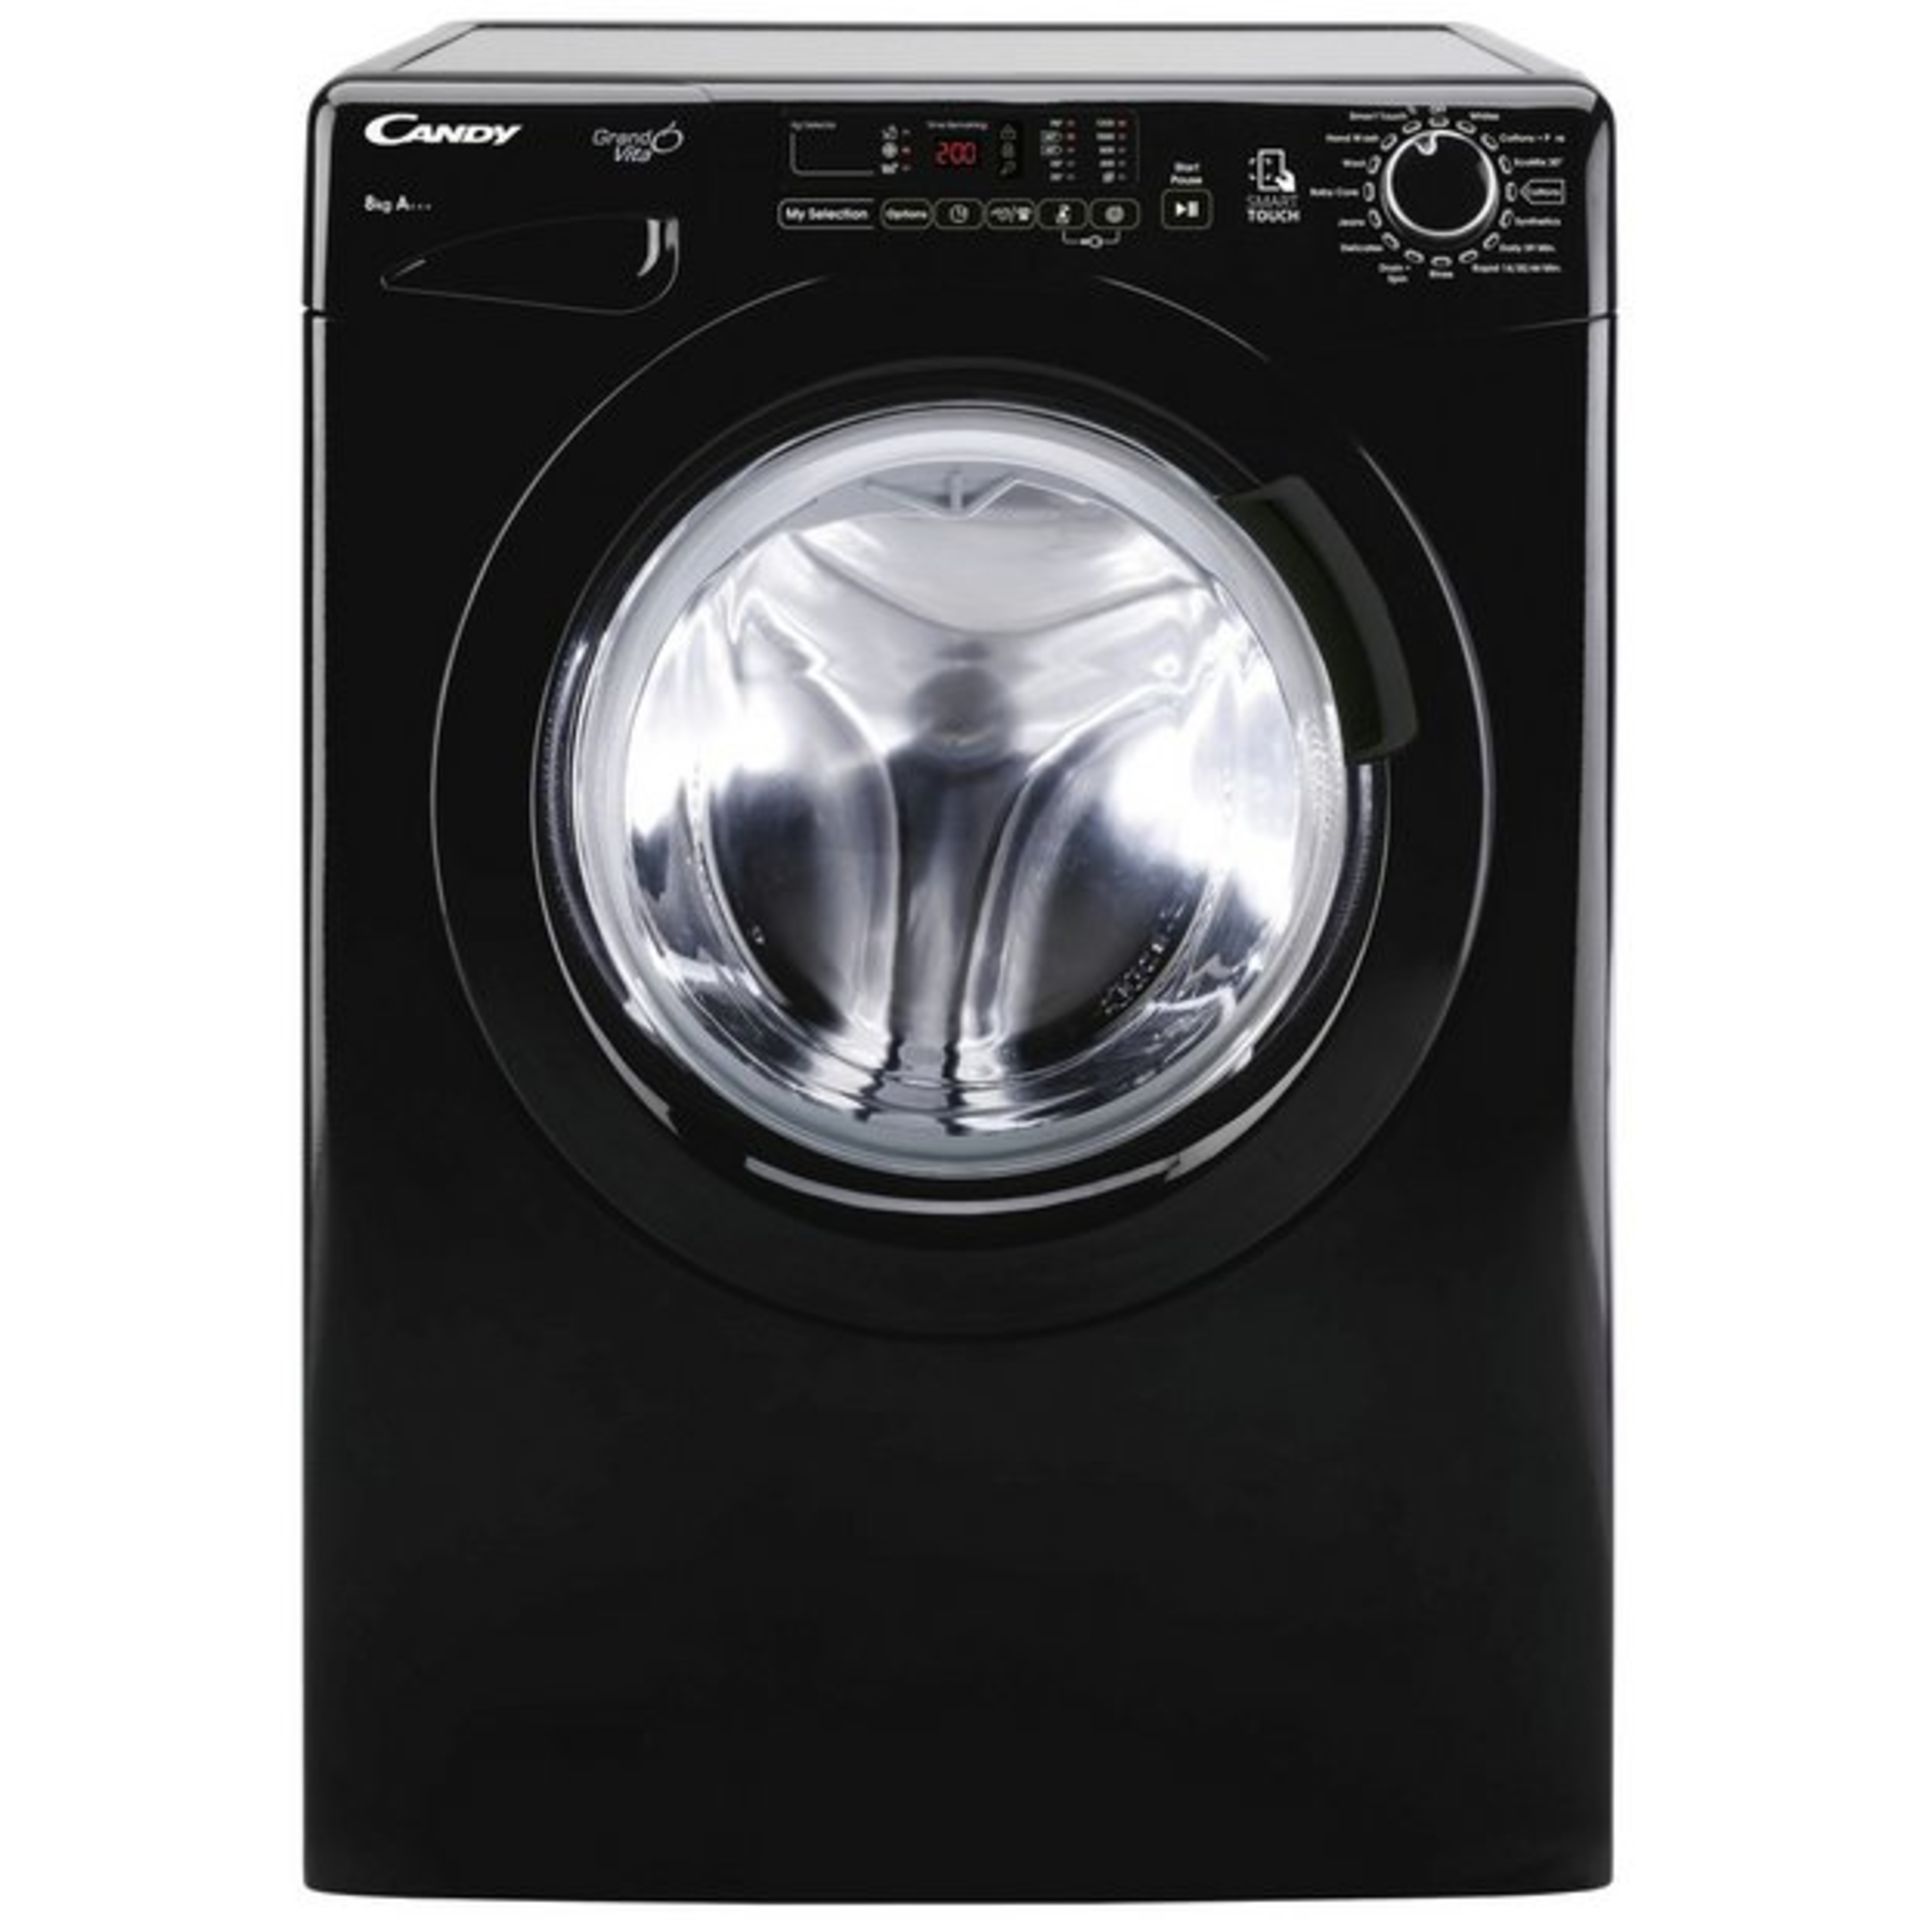 + VAT Grade A/B Candy GVO1482DB3B 8Kg 1400 Spin Washing Machine - A+++ Energy Rating - 14 Minute